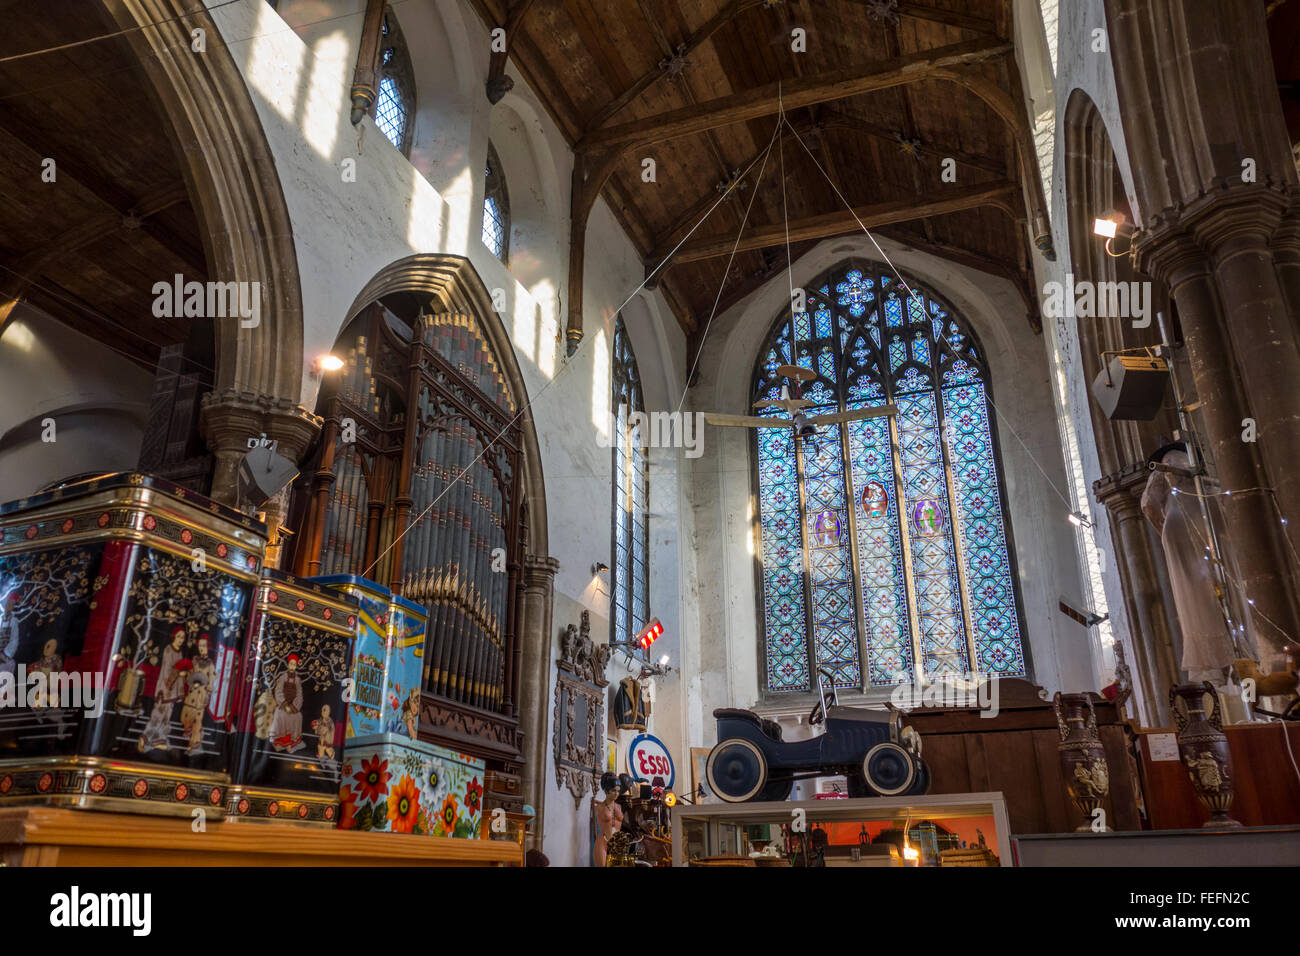 Antiques shop in an old church, Norwich, UK Stock Photo